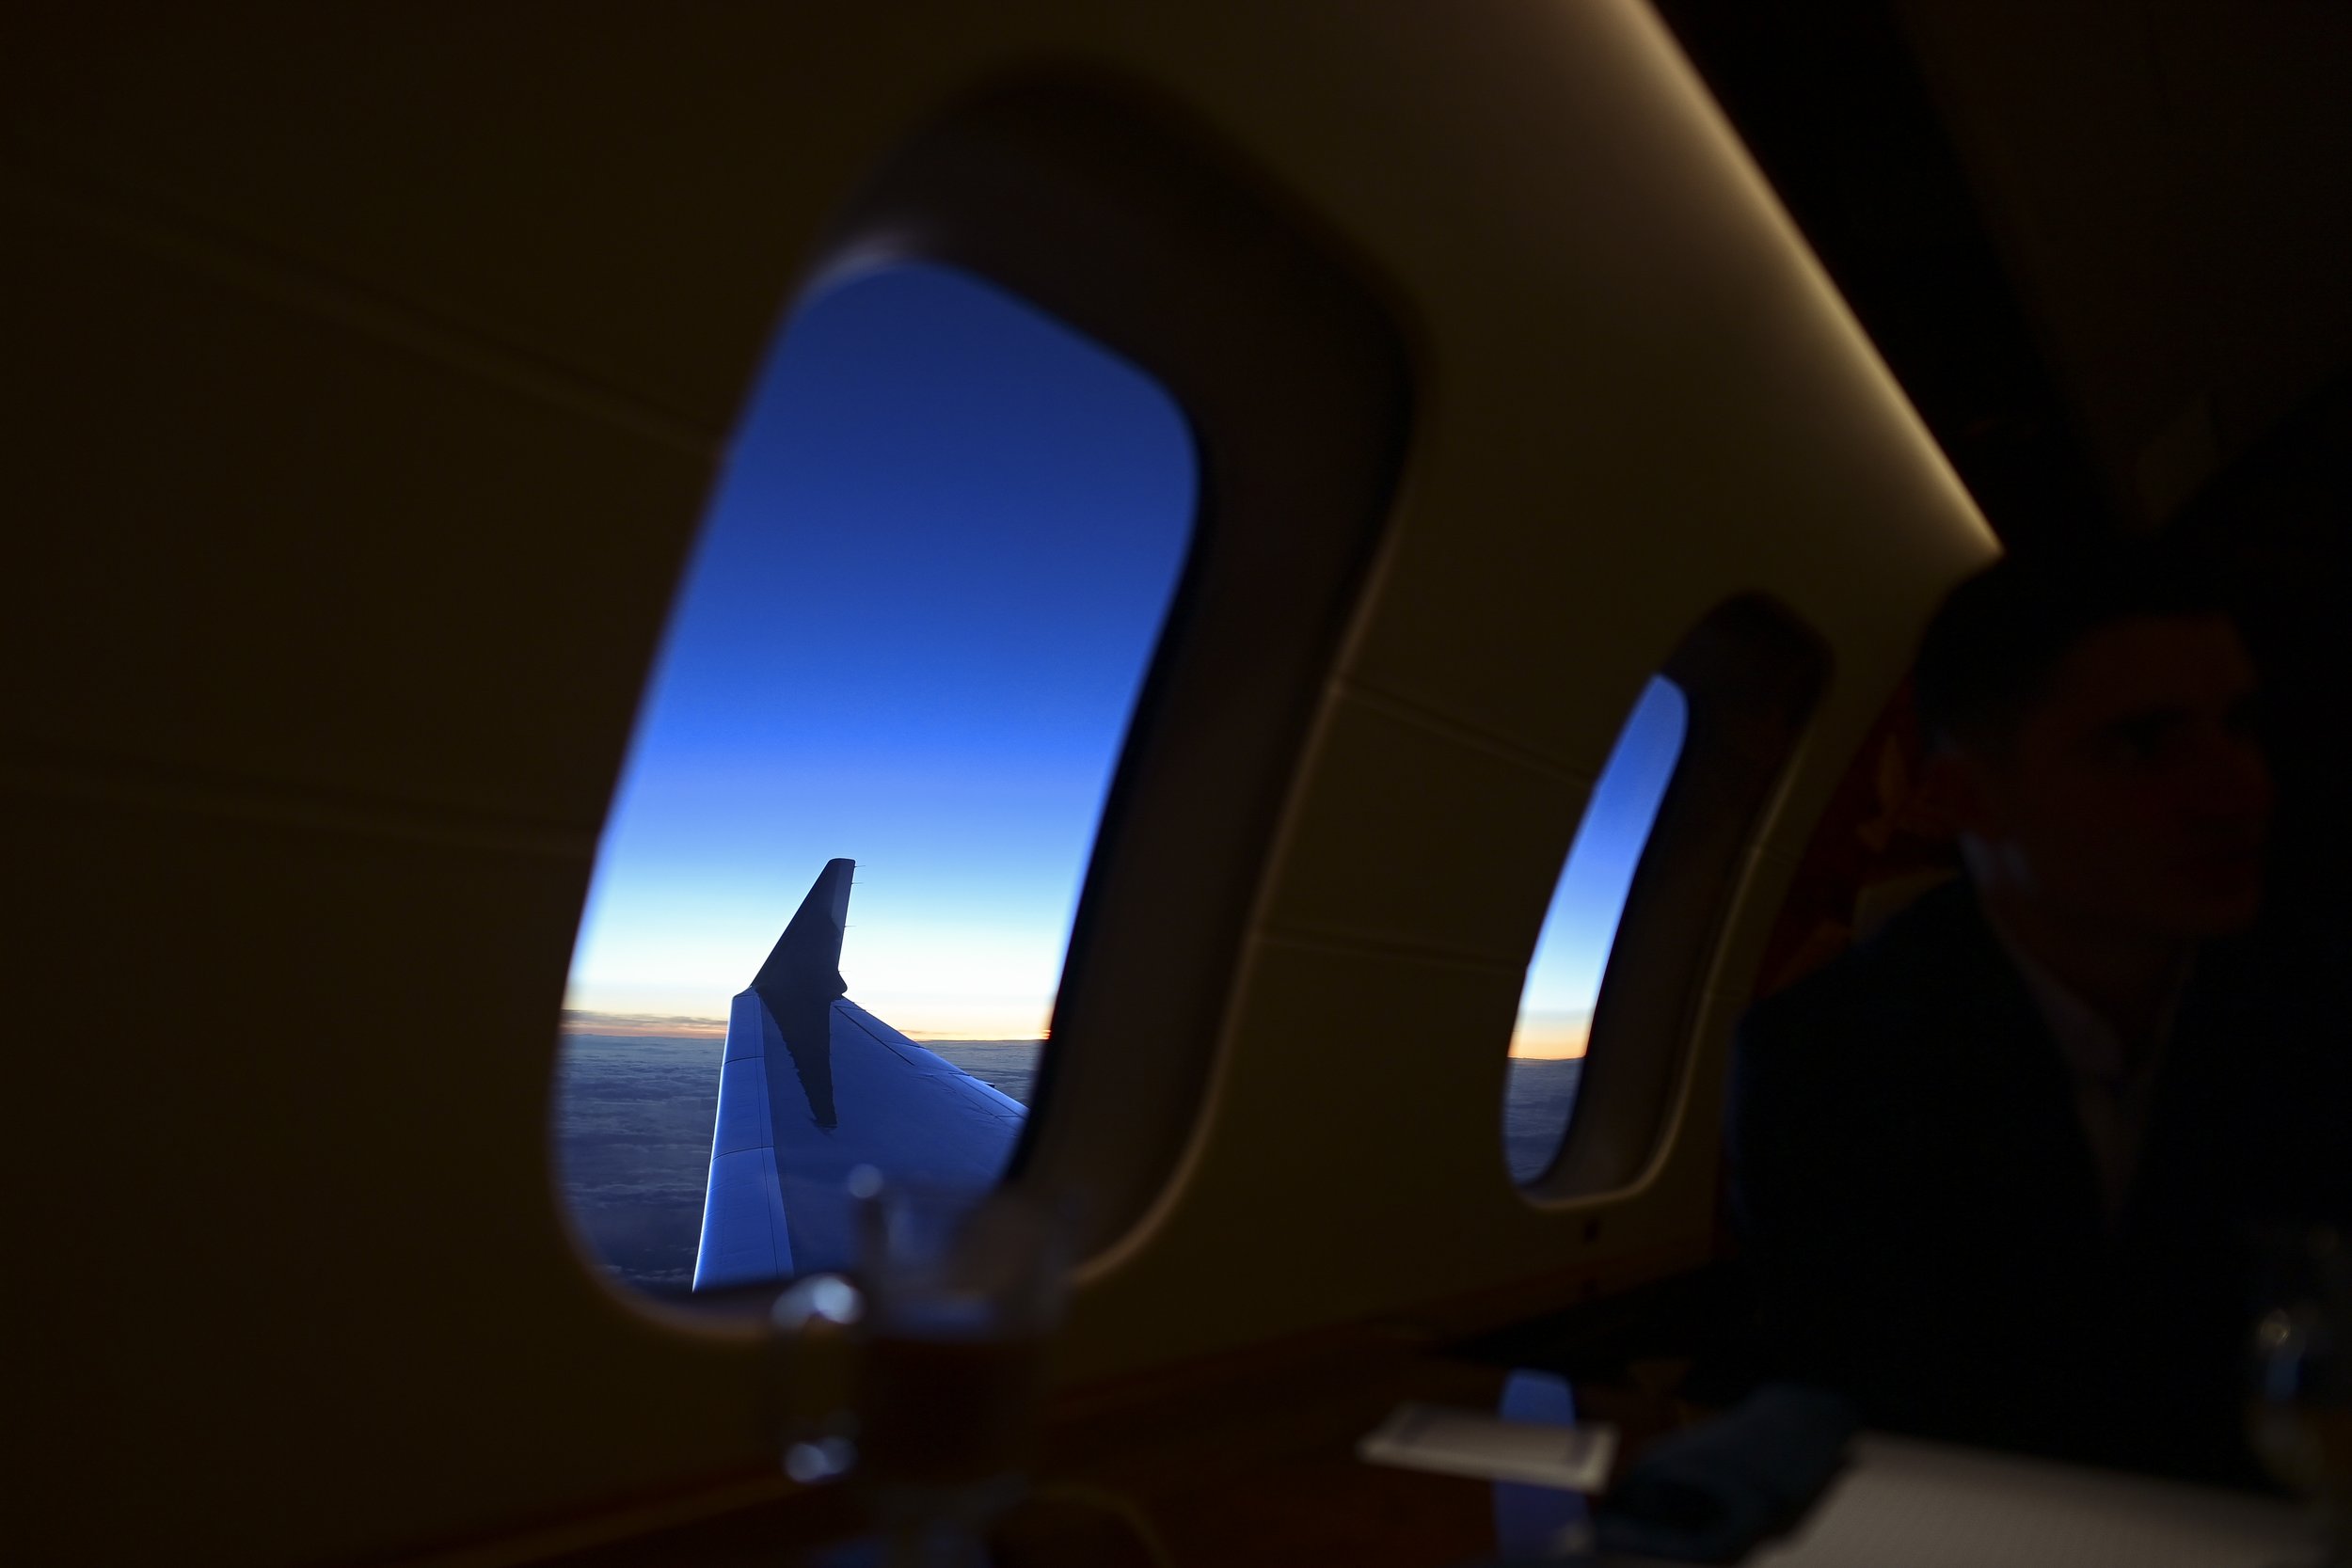  View from the jet en route to Las Vegas, Nevada, on Friday, April 29, 2022. (Photo by Shanna Lockwood/Atlanta Falcons) 